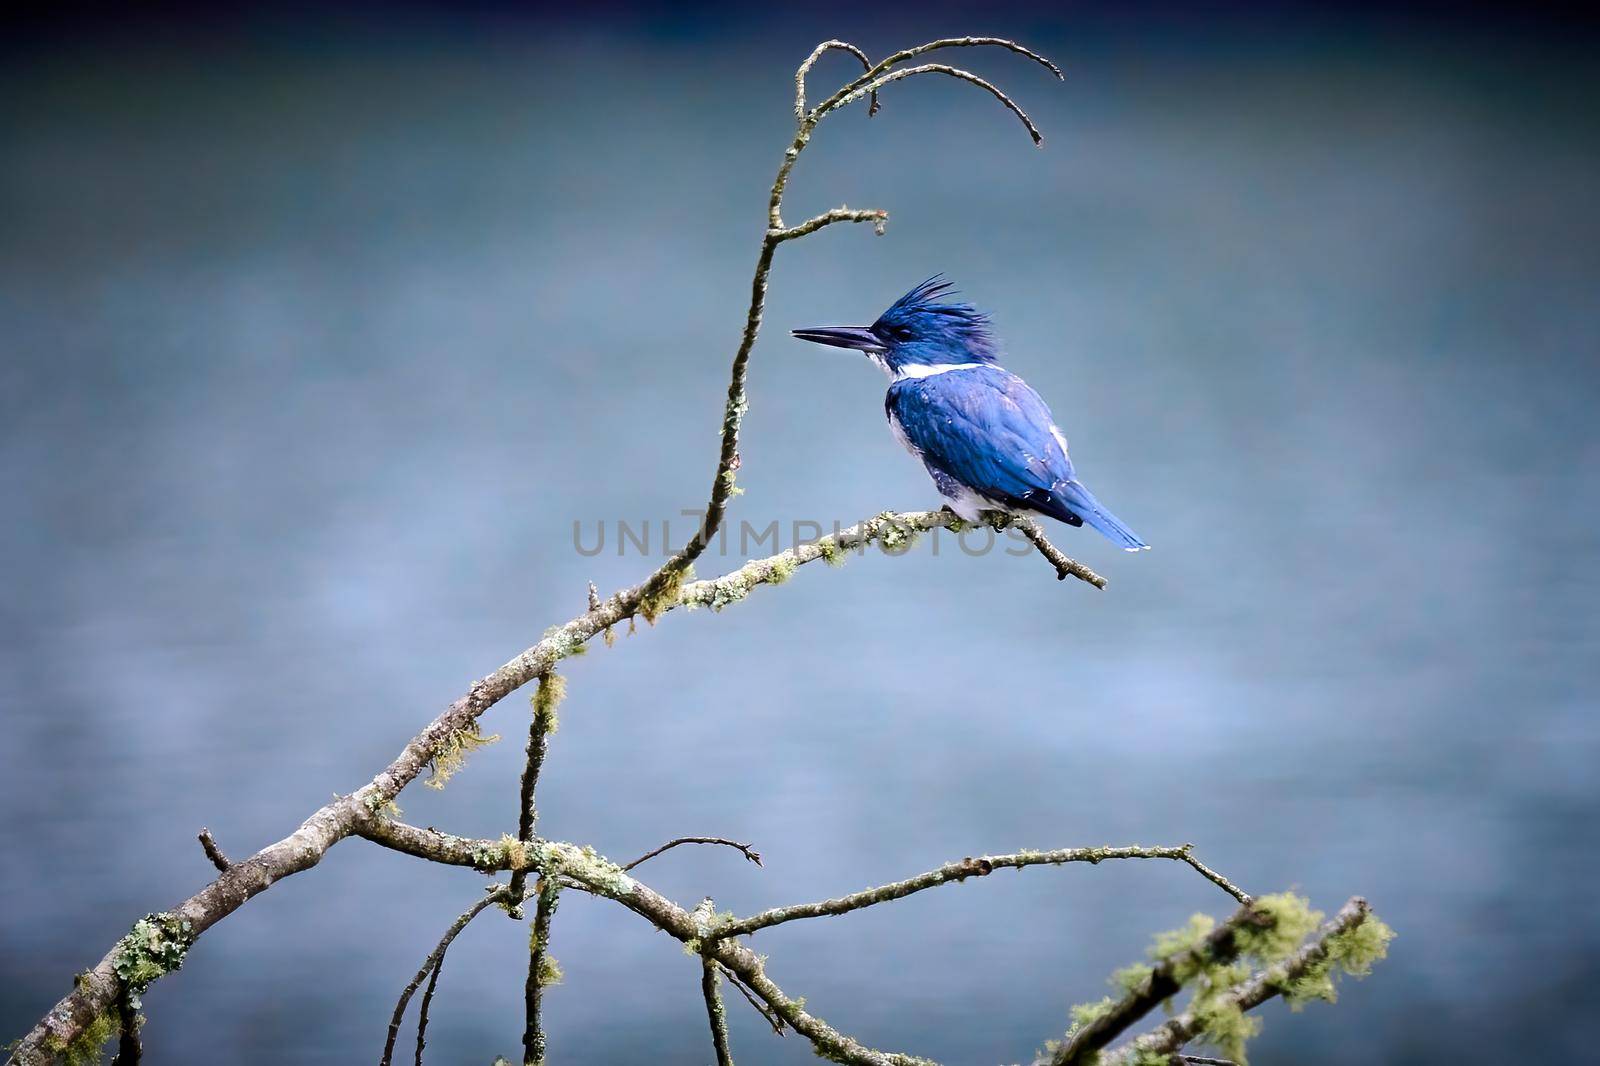 Male Belted Kingfisher (Megaceryle alcyon) perched on a dead branch at Lake Chatuge, NC.